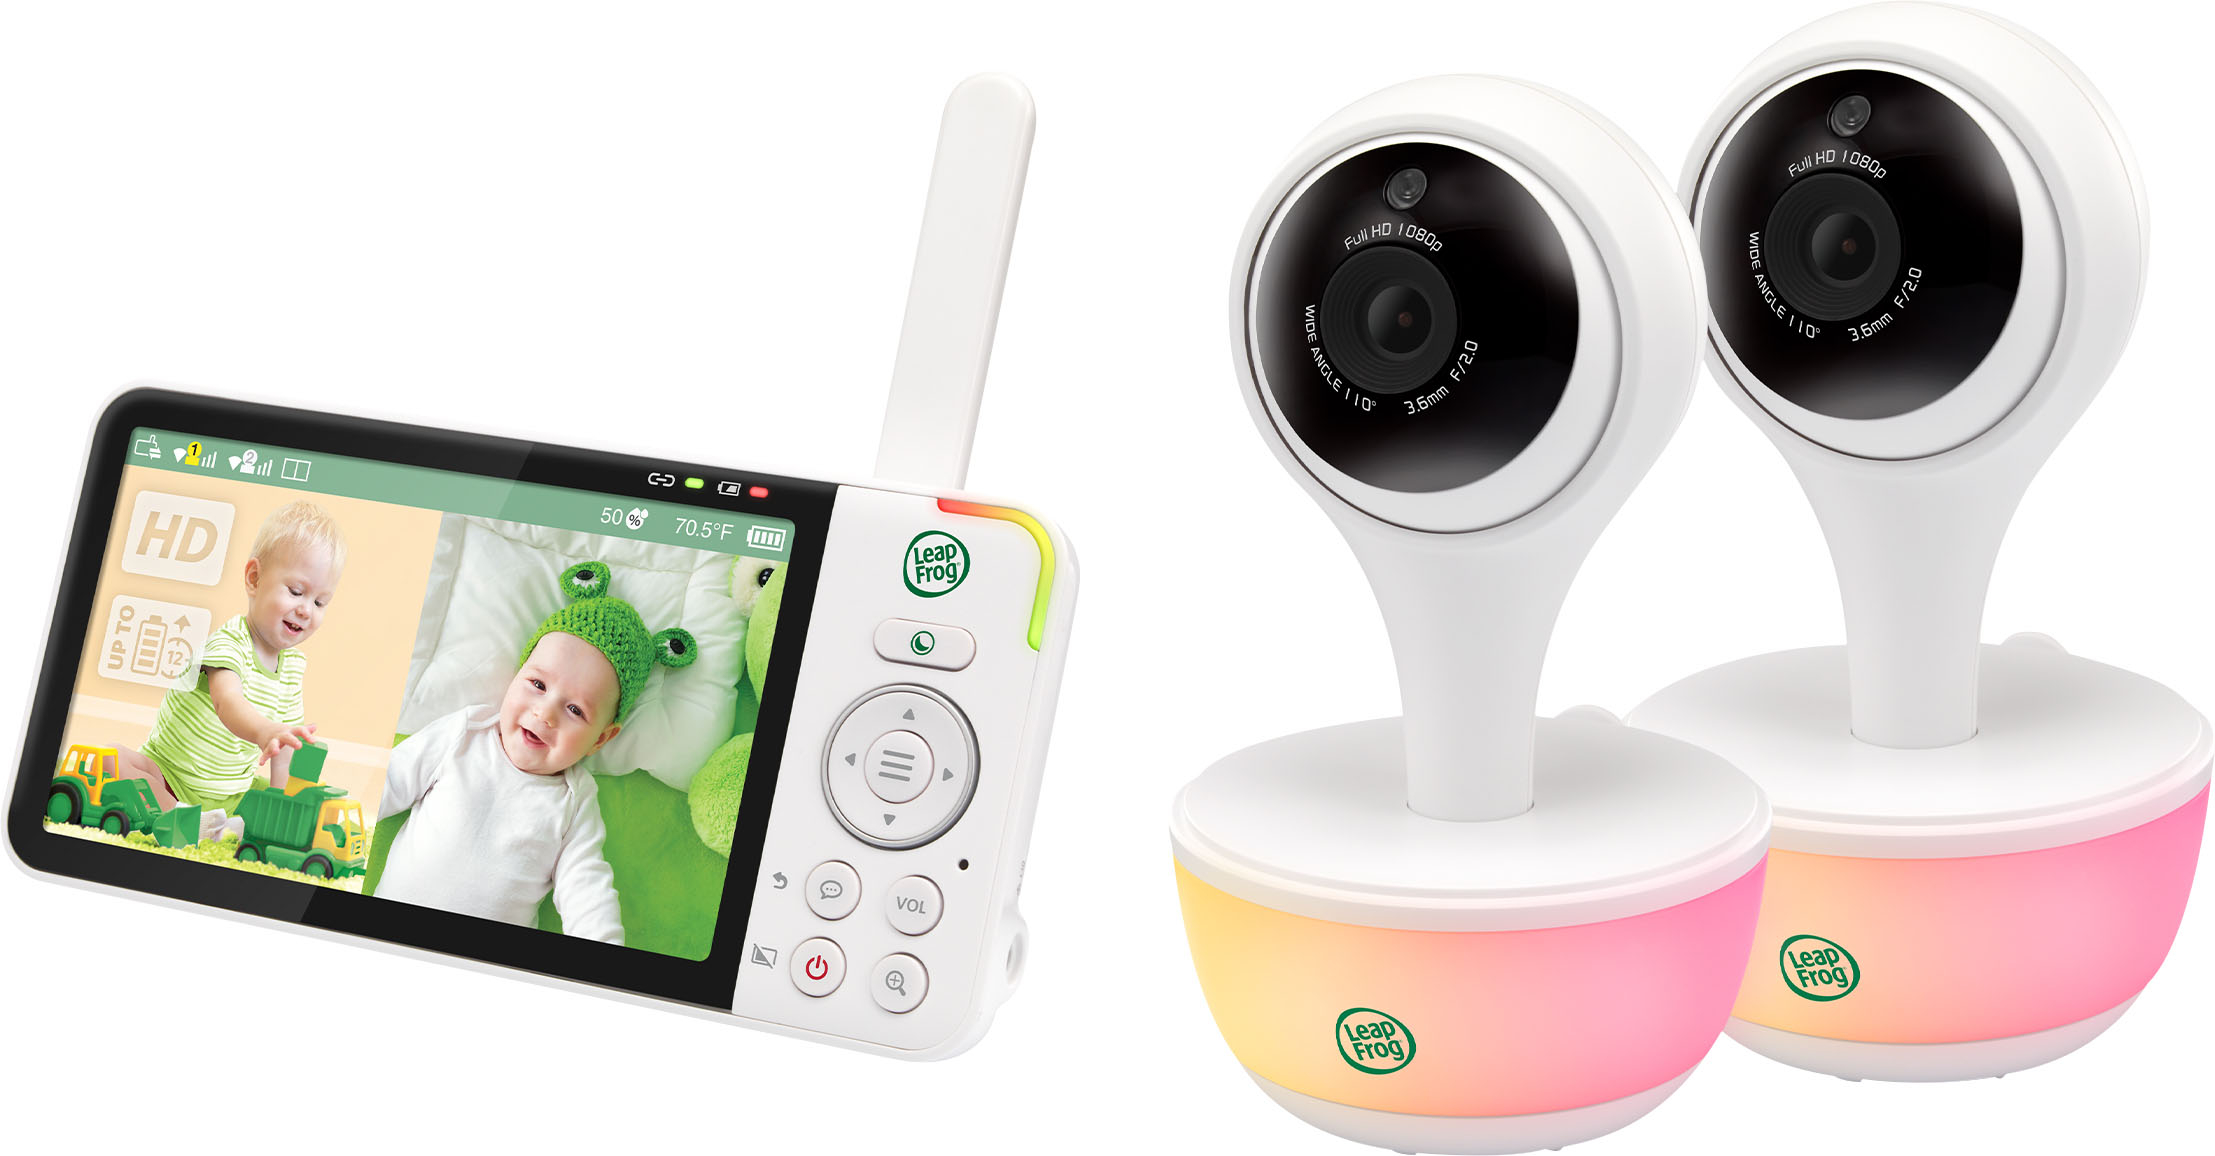 Angle View: LeapFrog - 1080p WiFi Remote Access 2 Camera Video Baby Monitor with 5” Display, Night Light, Color Night Vision - white